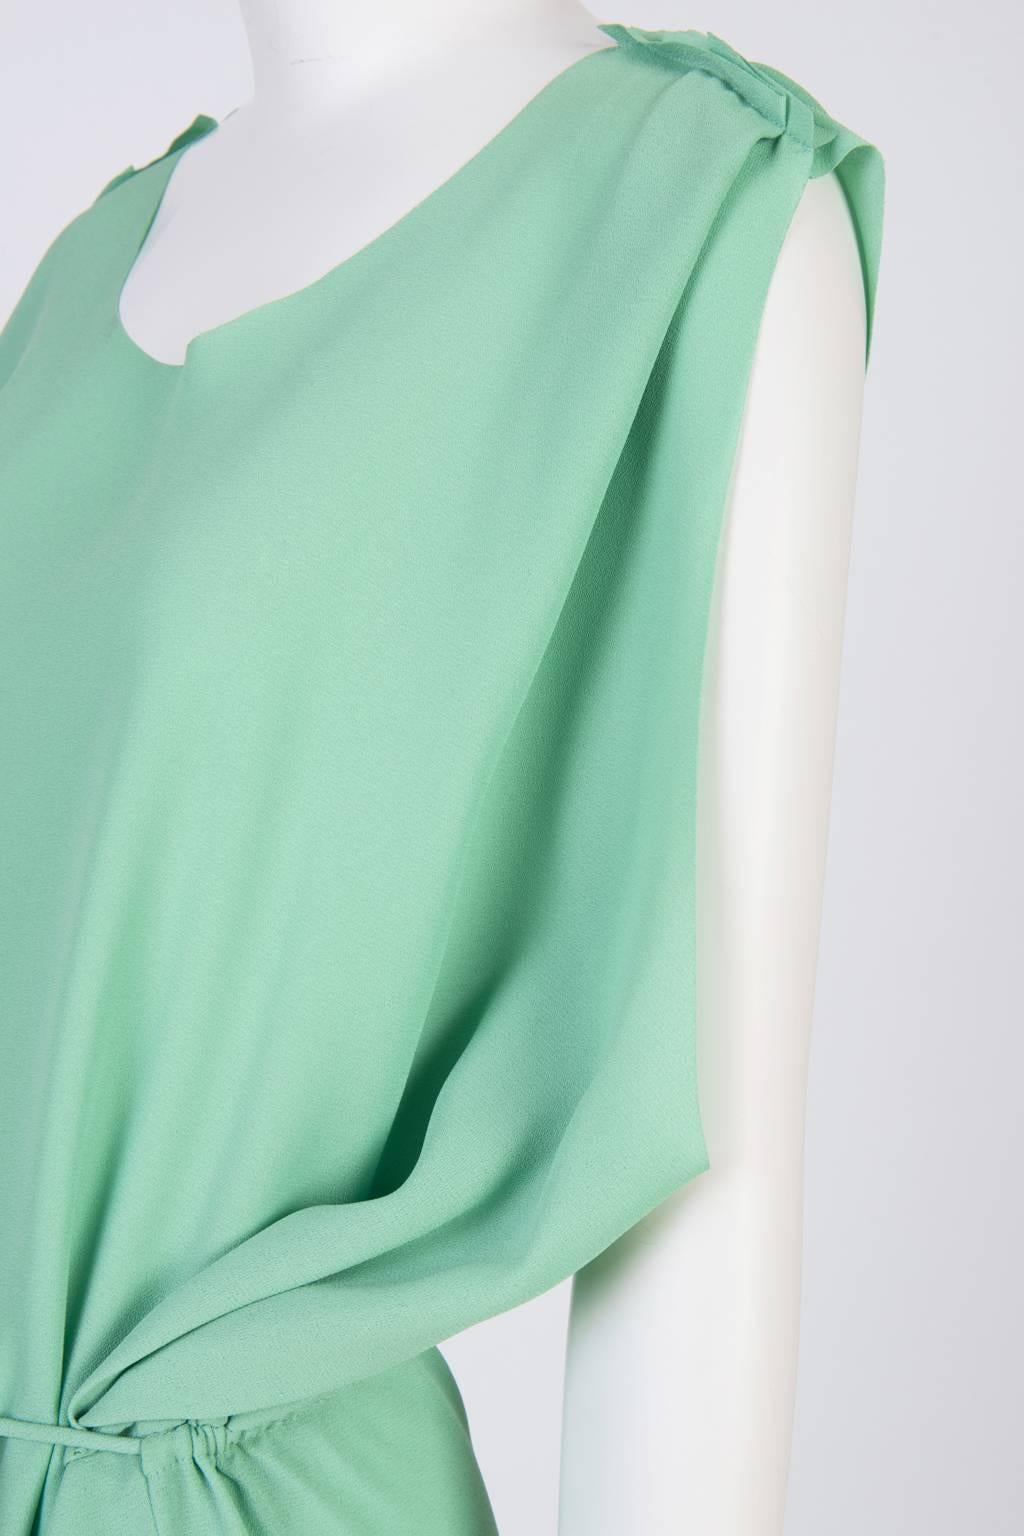 Acne Mint Oversized Sleevless Dress  In Excellent Condition For Sale In Xiamen, Fujian